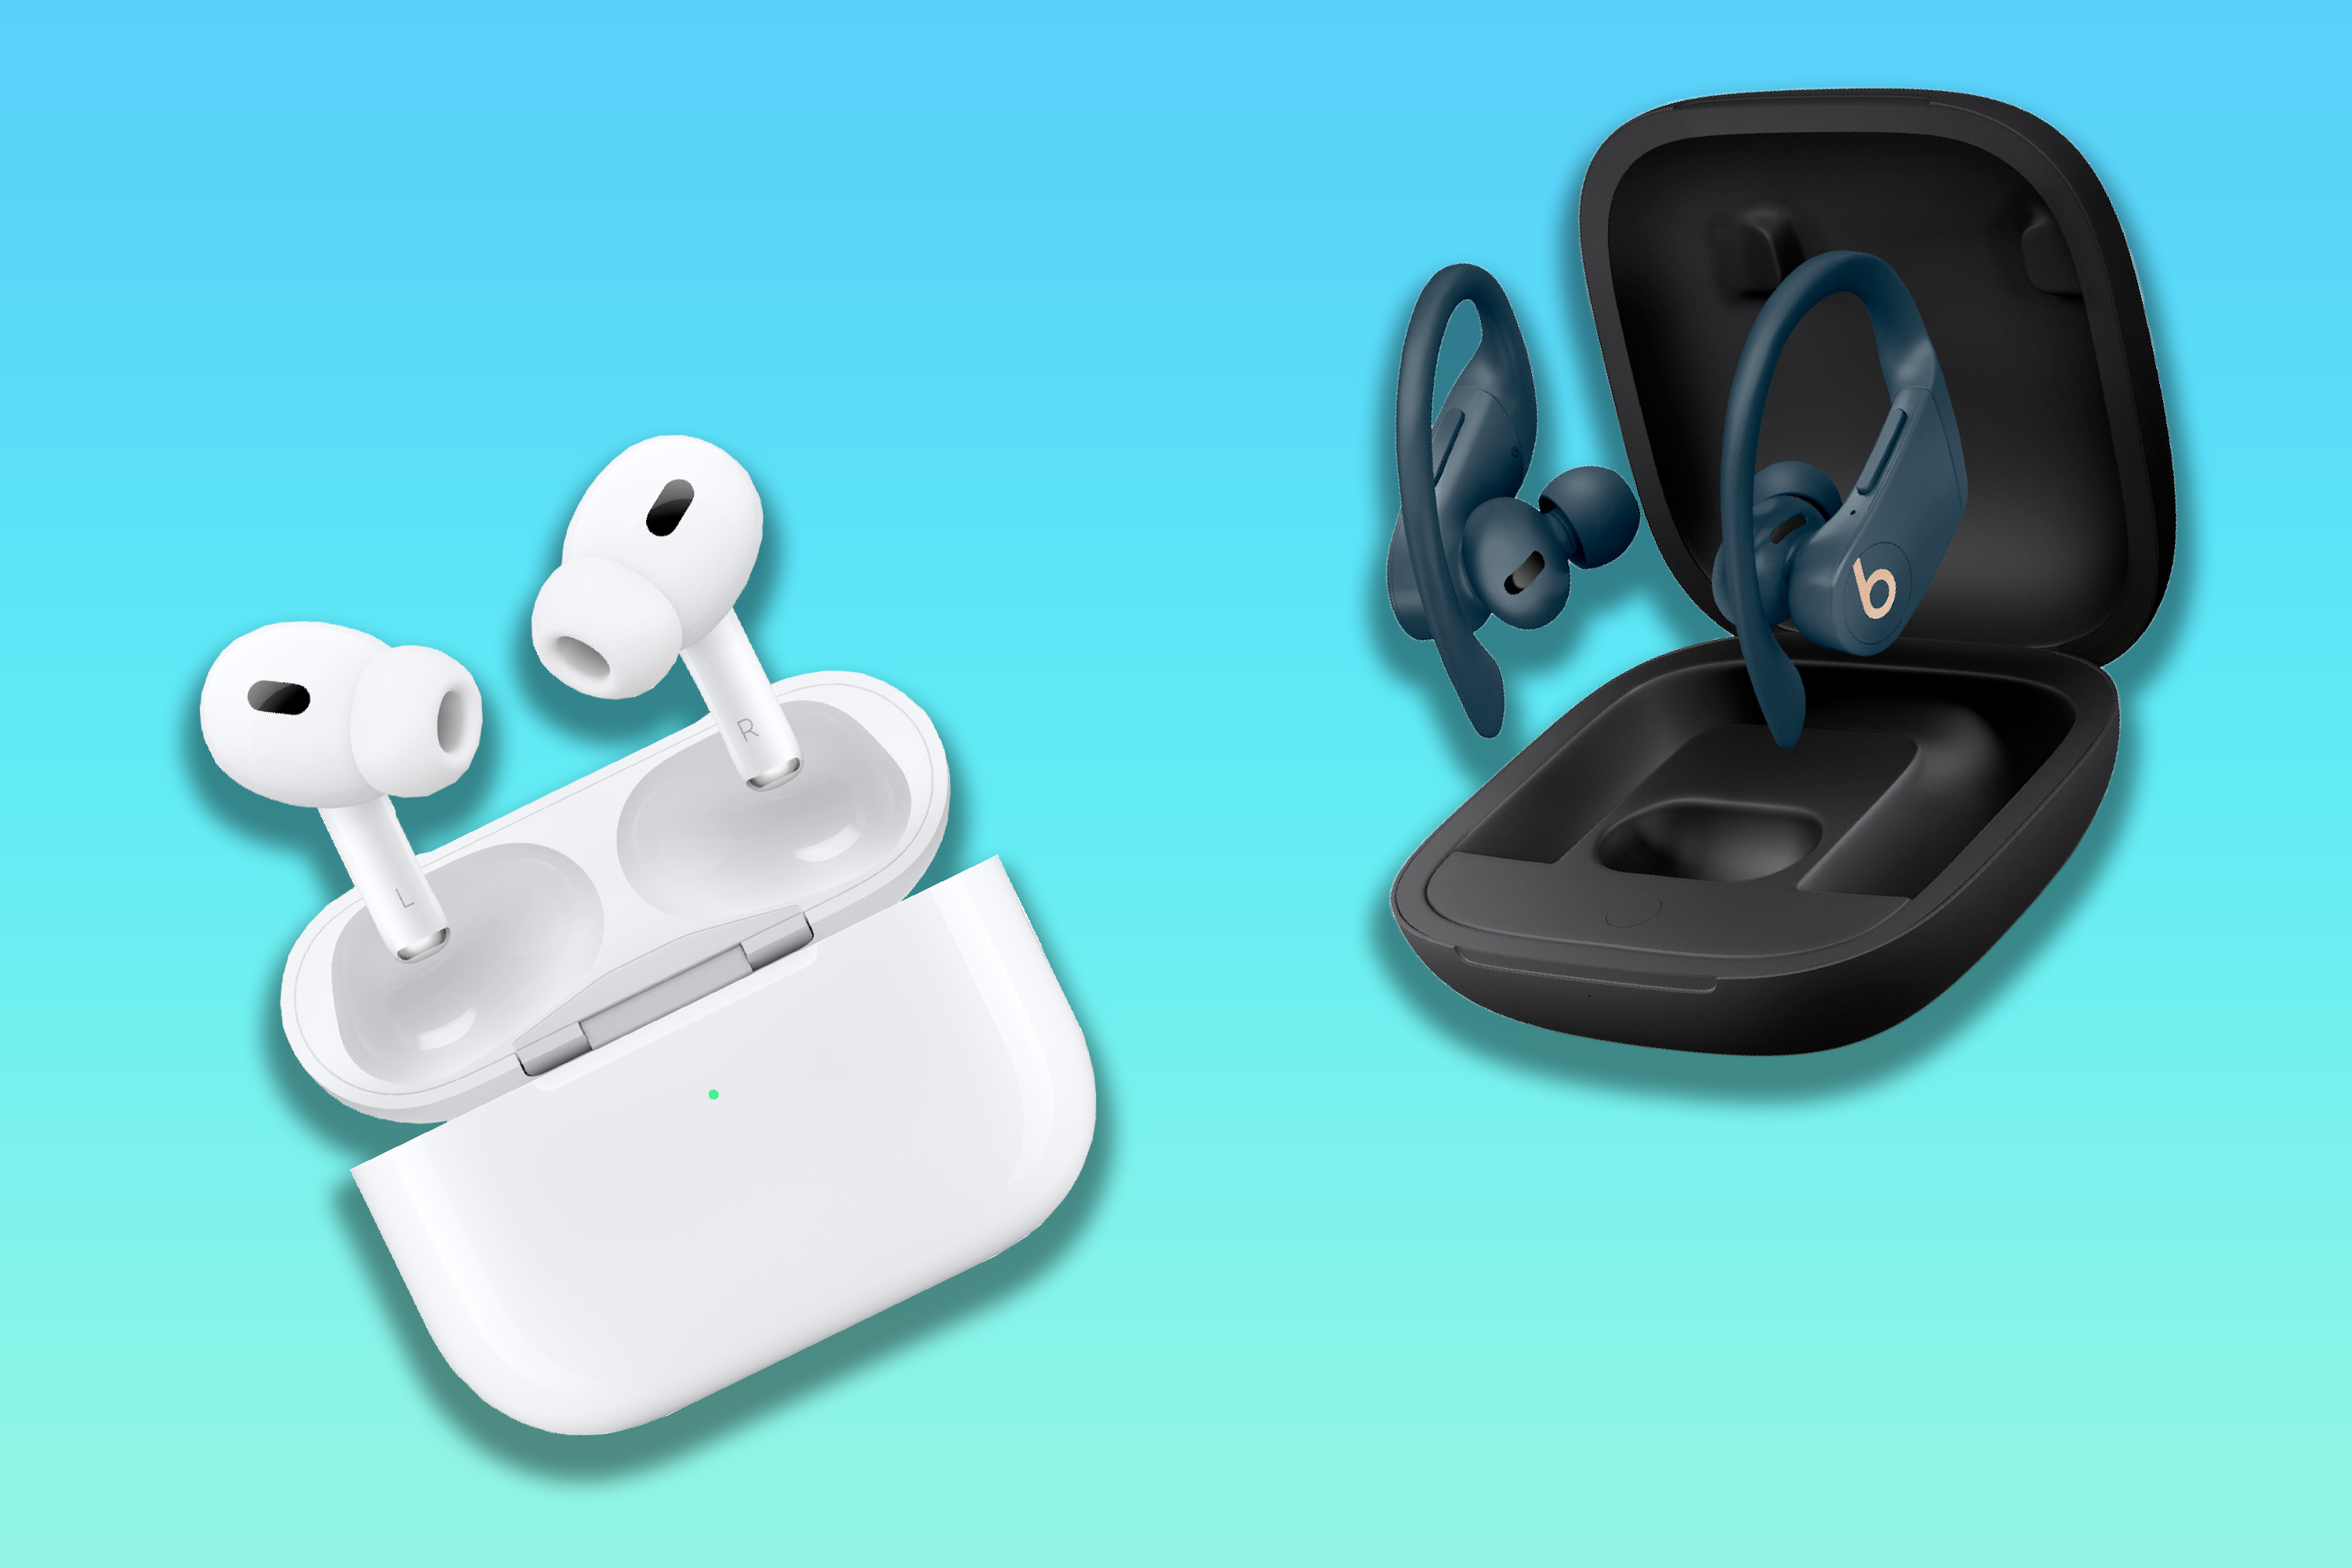 Apple AirPods Pro vs Beats Powerbeats Pro: which one should you